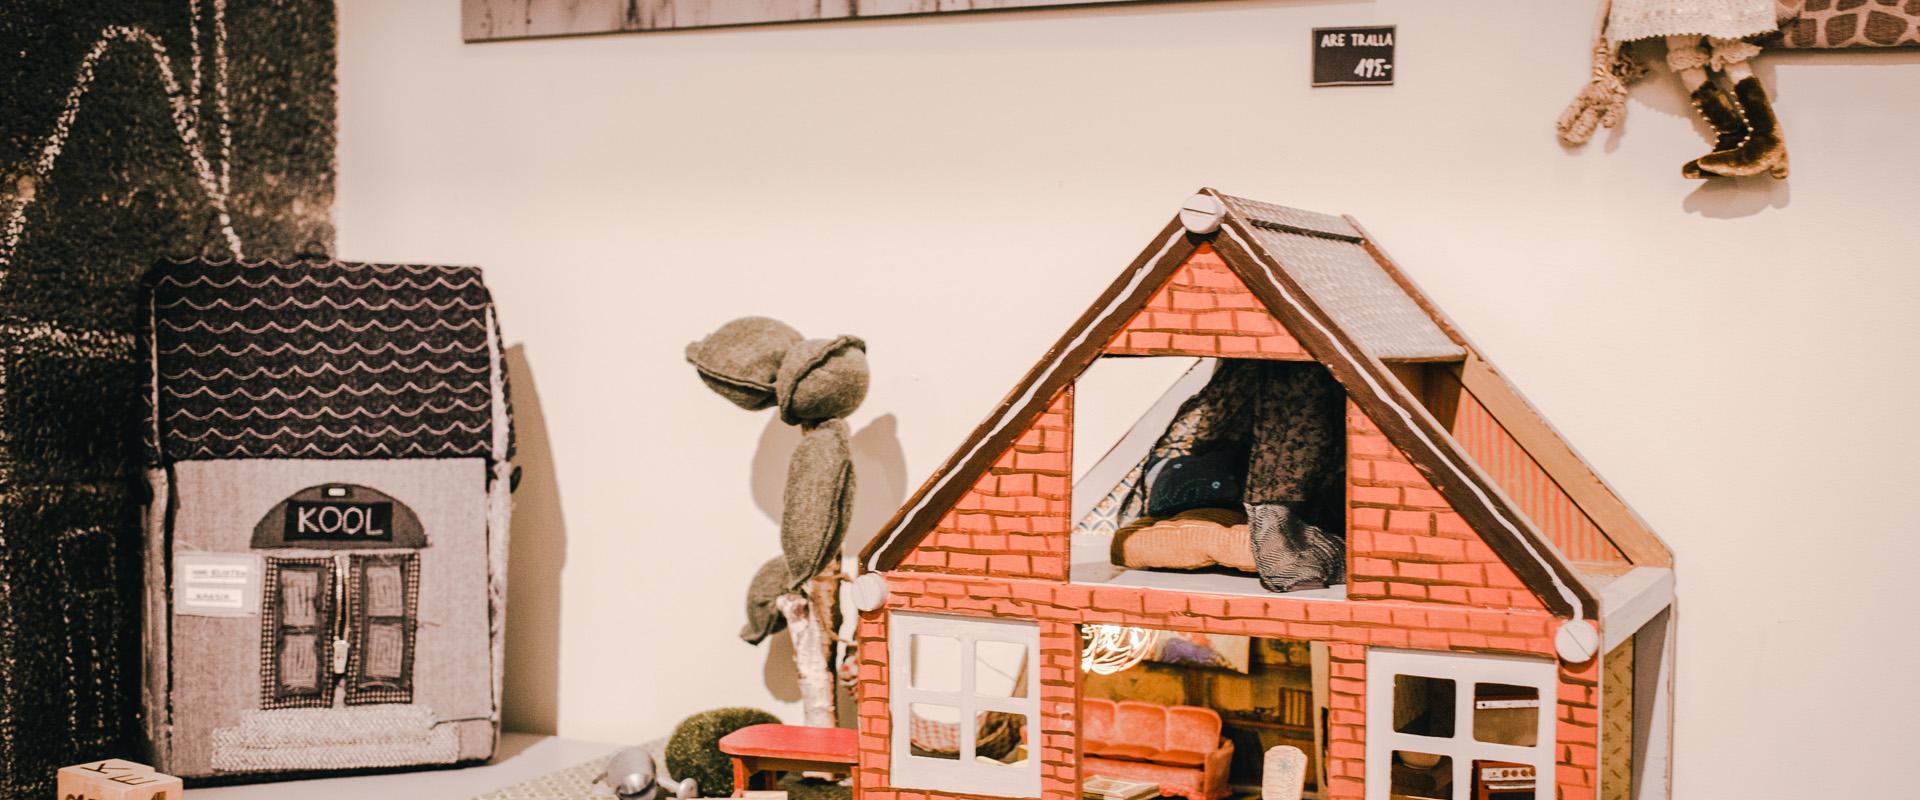 Studio shop Karud ja Pojad playroom: miniature bearhouse and textile schoolhouse, small bears, and a doll. A black-and-white photo of trees and the Emajõgi River on the wall.